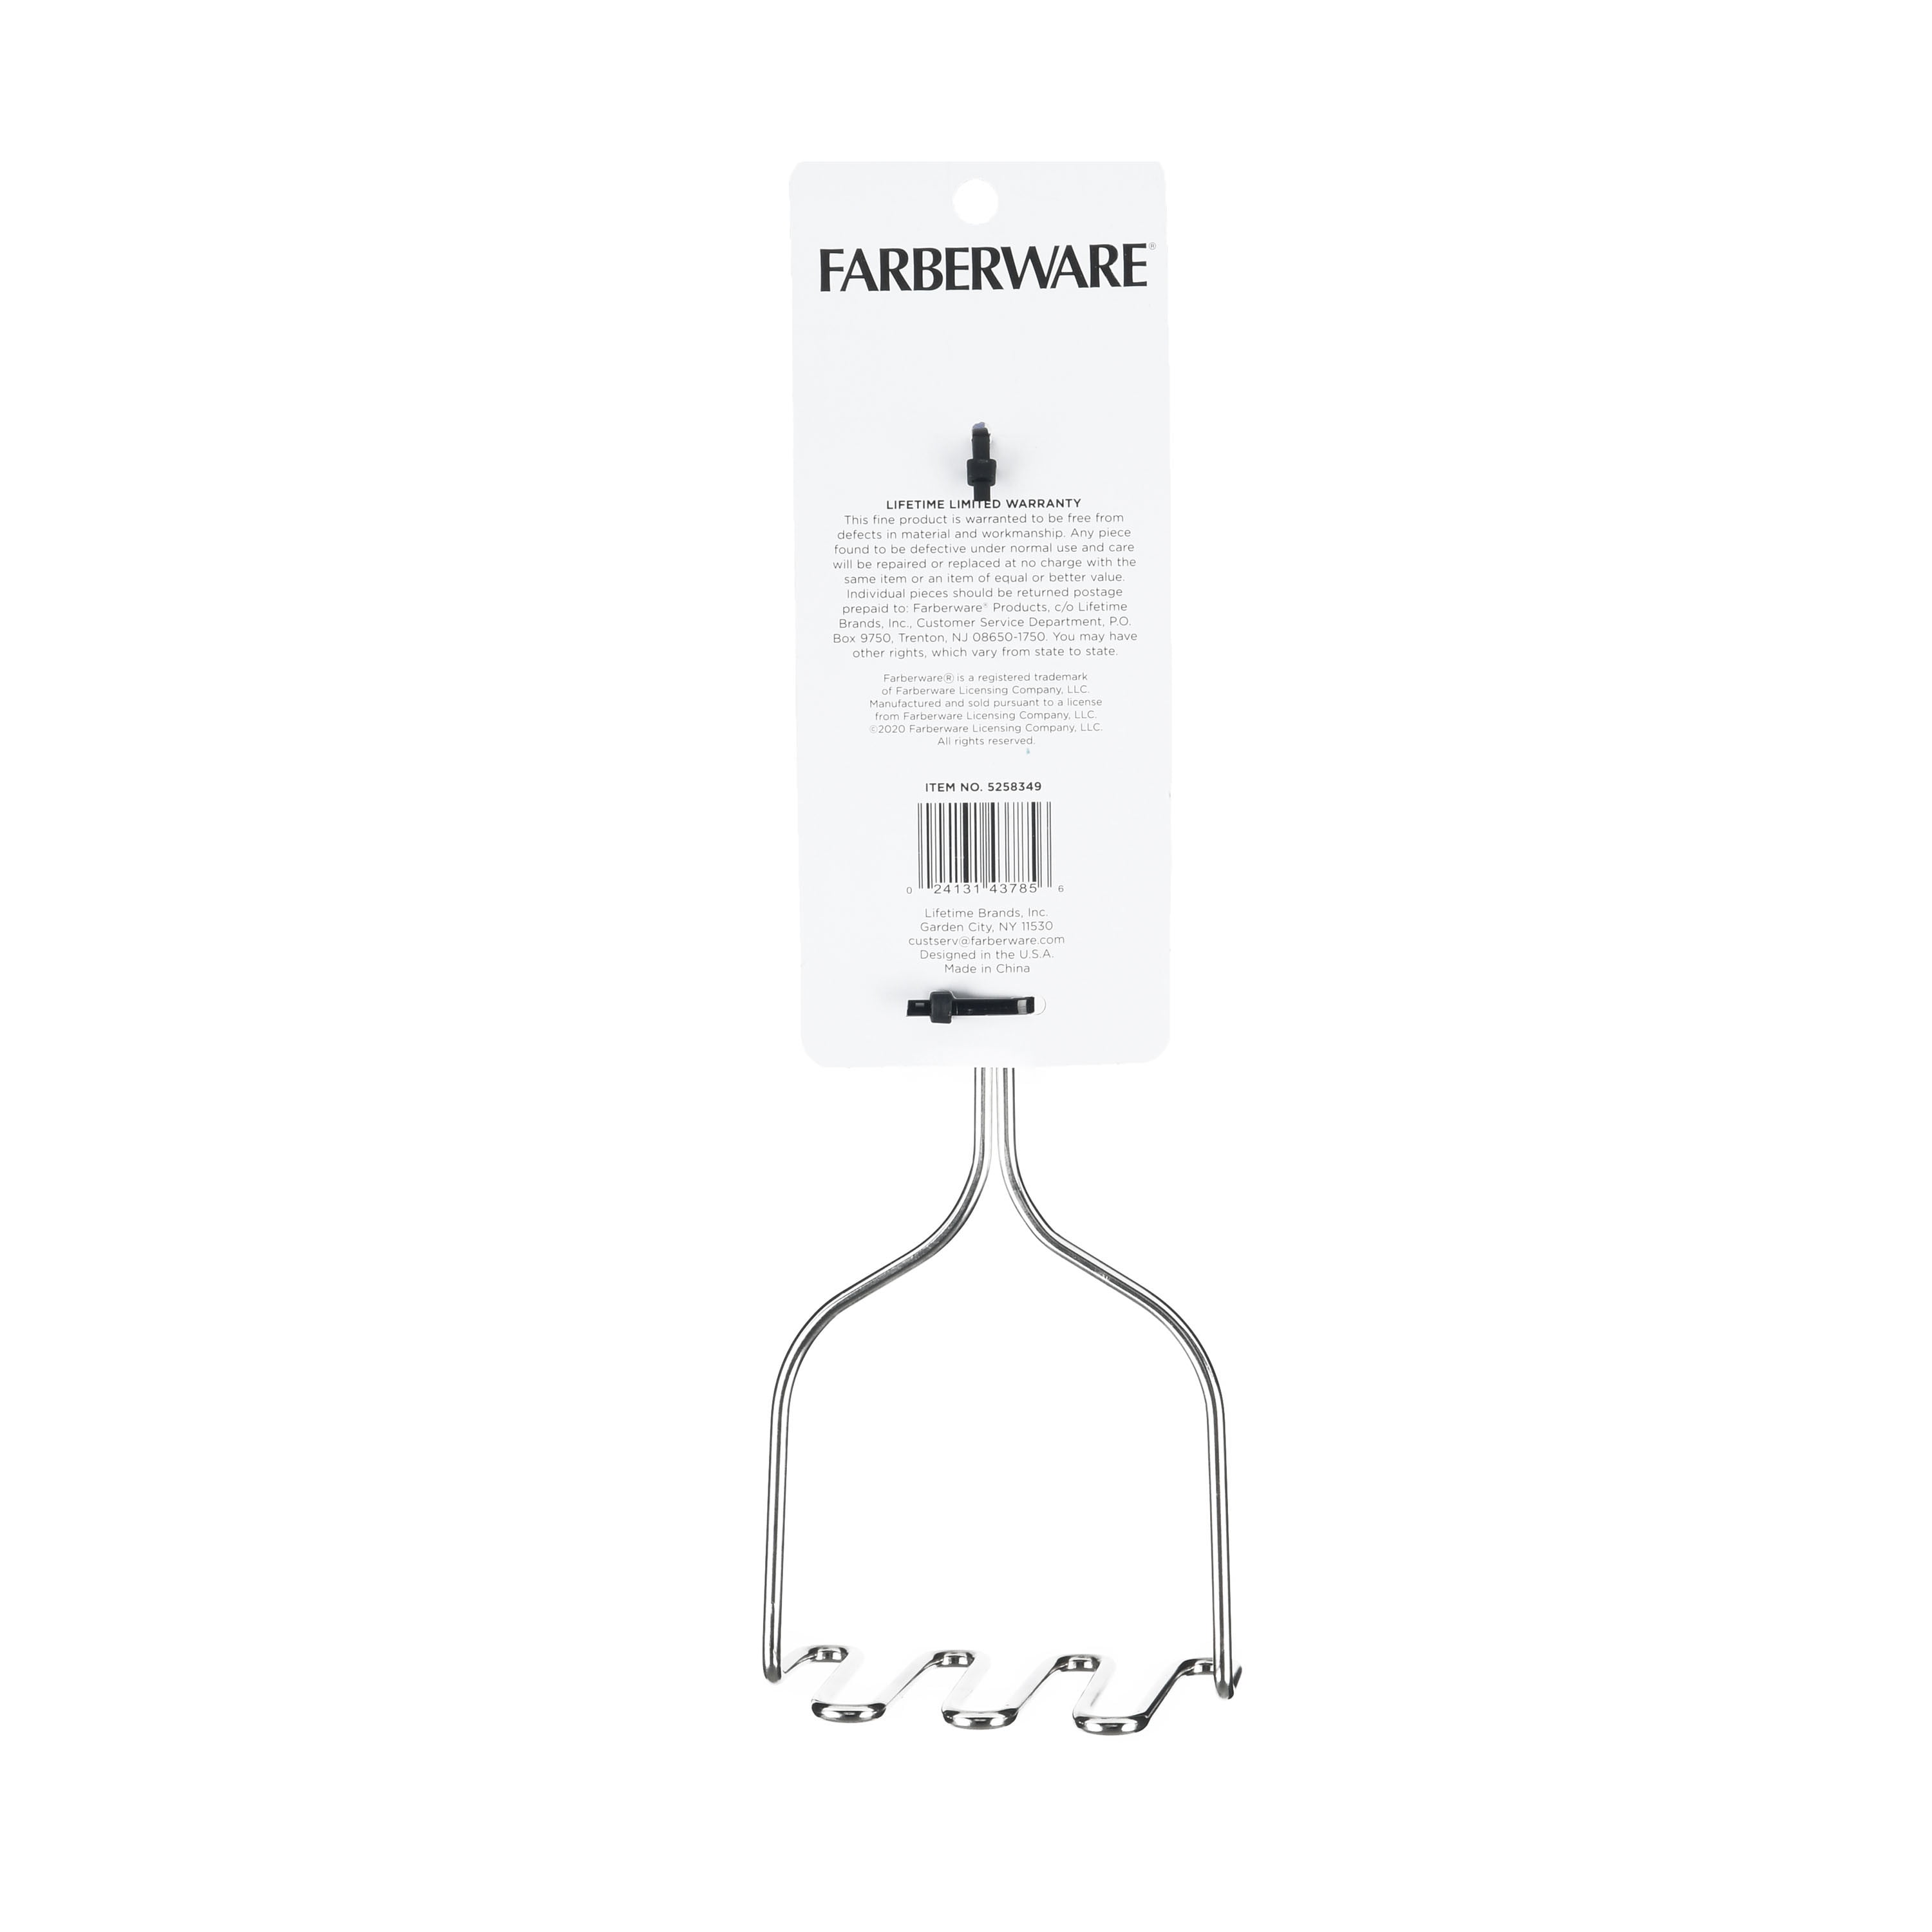 NEW Farberware Professional Meat Masher, BPA Free - Soft Touch Handle, 5253700